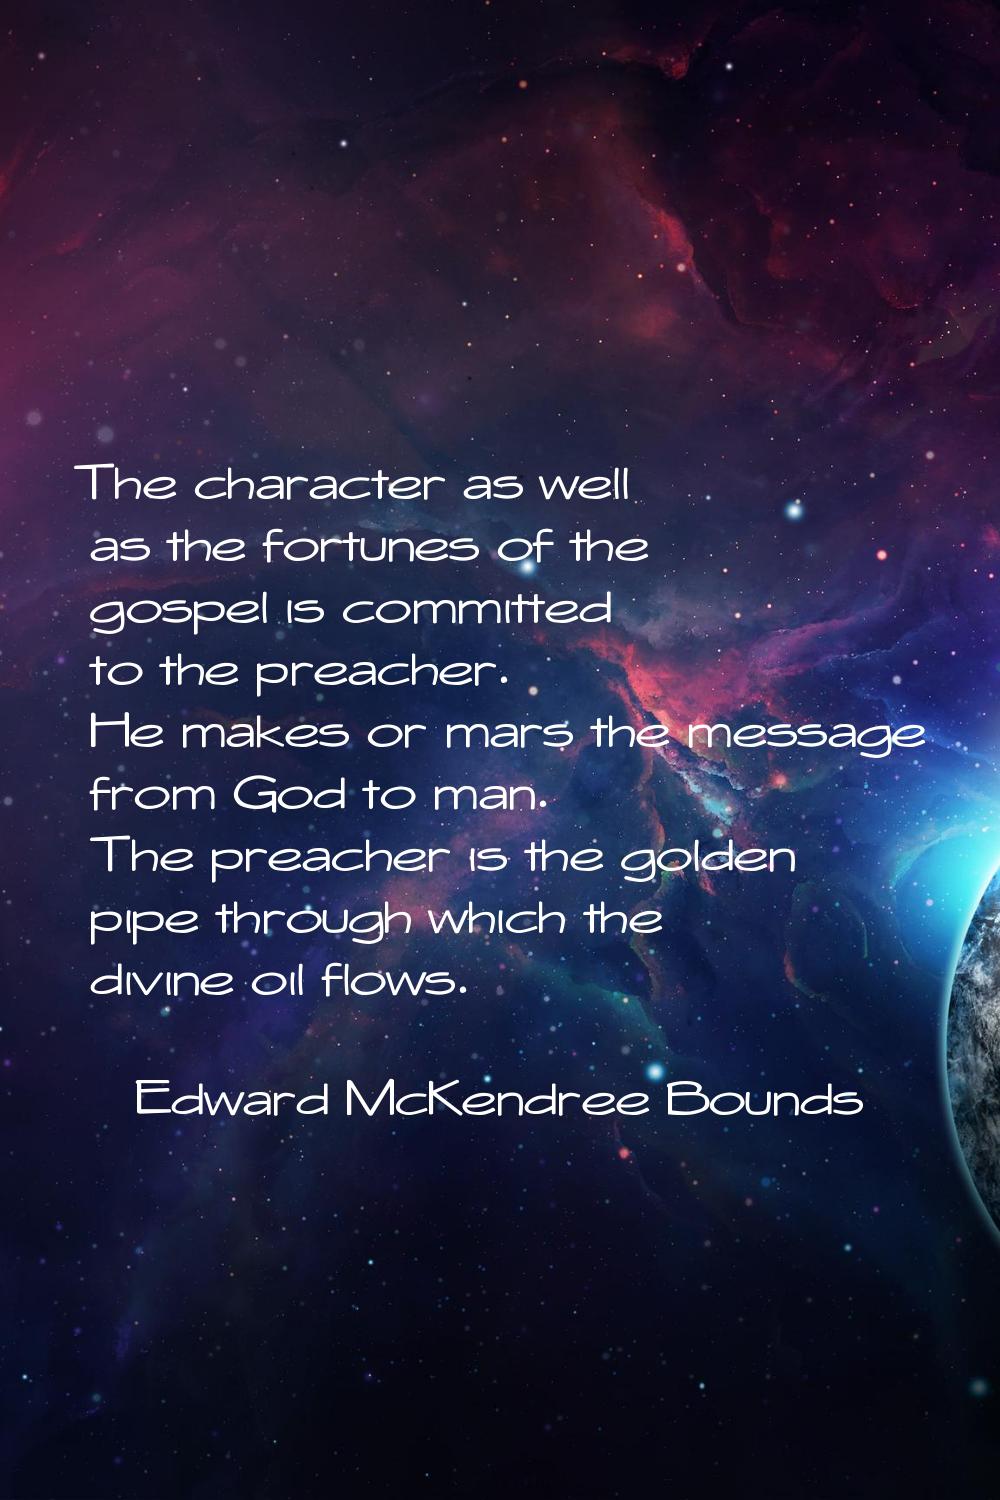 The character as well as the fortunes of the gospel is committed to the preacher. He makes or mars 